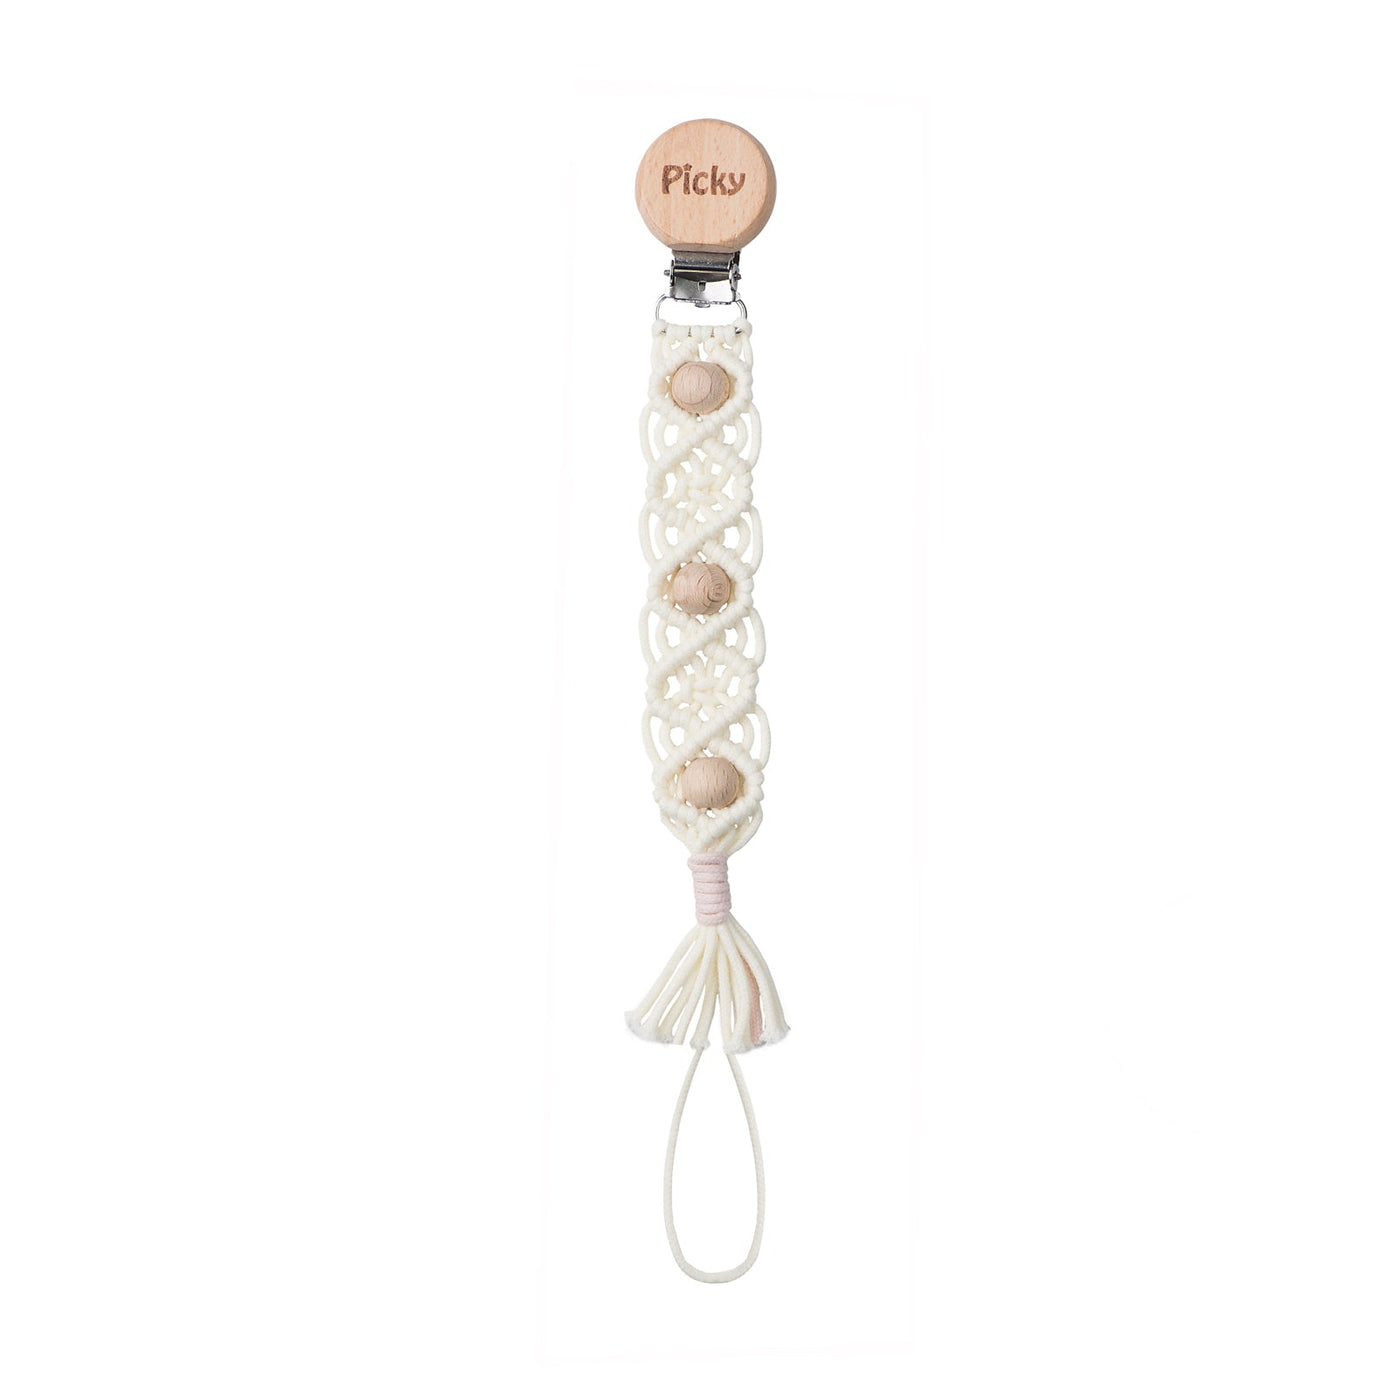 Picky Pacifier Clip with Wood Beads Pink Trim